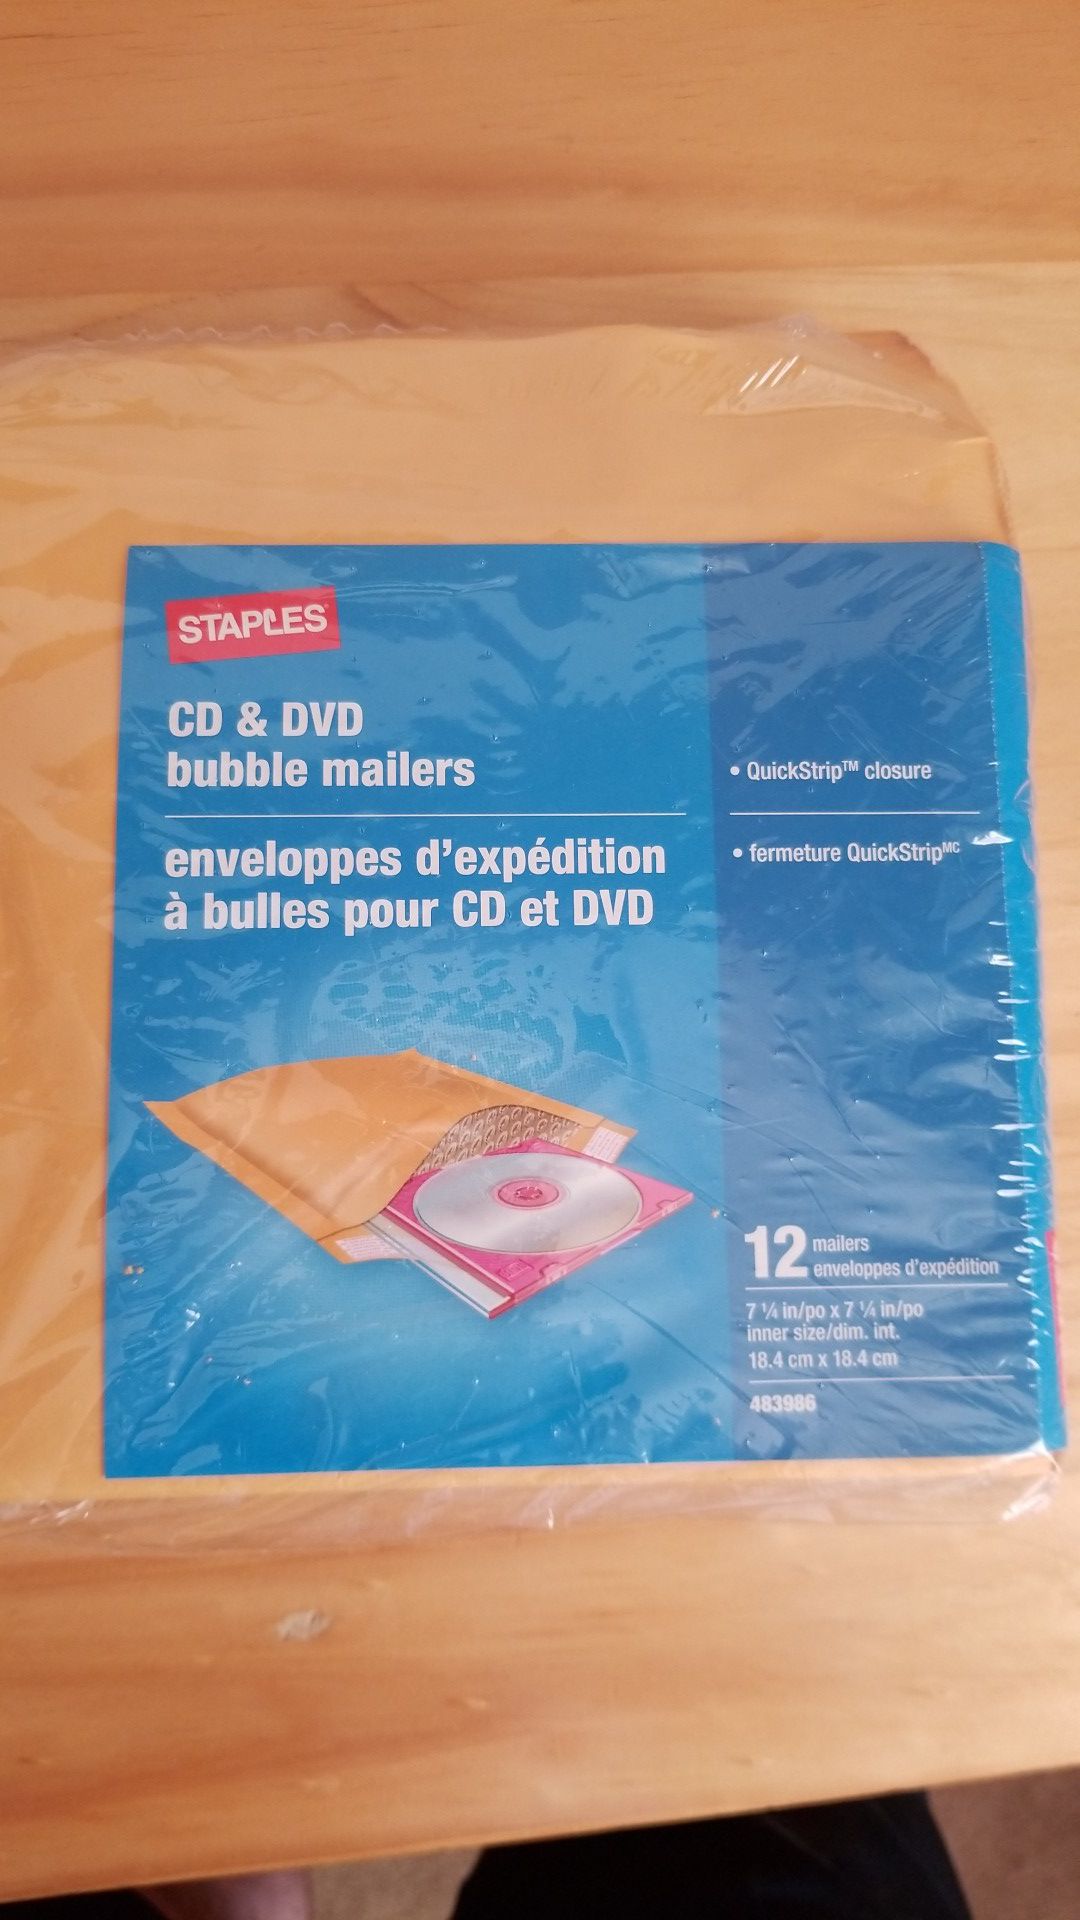 CD/DVD bubble mailers